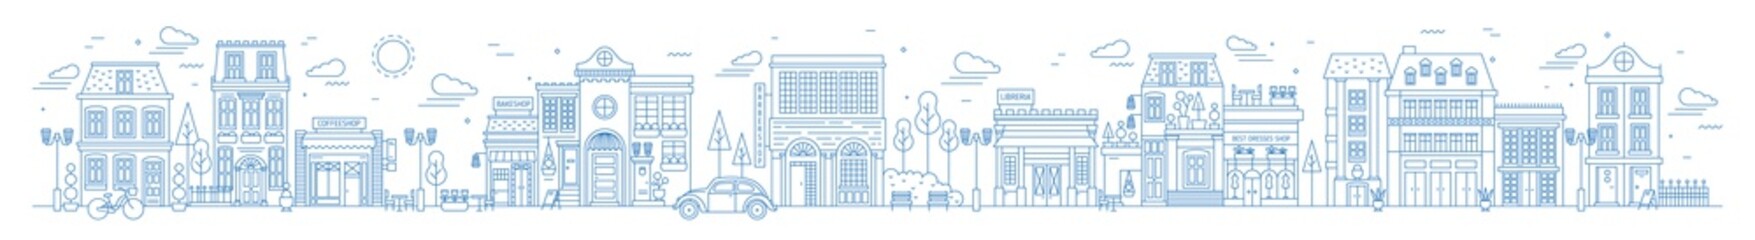 Fototapete - Monochrome horizontal urban landscape with city or town street or district. Cityscape with living houses and shops drawn with contour lines on white background. Vector illustration in lineart style.